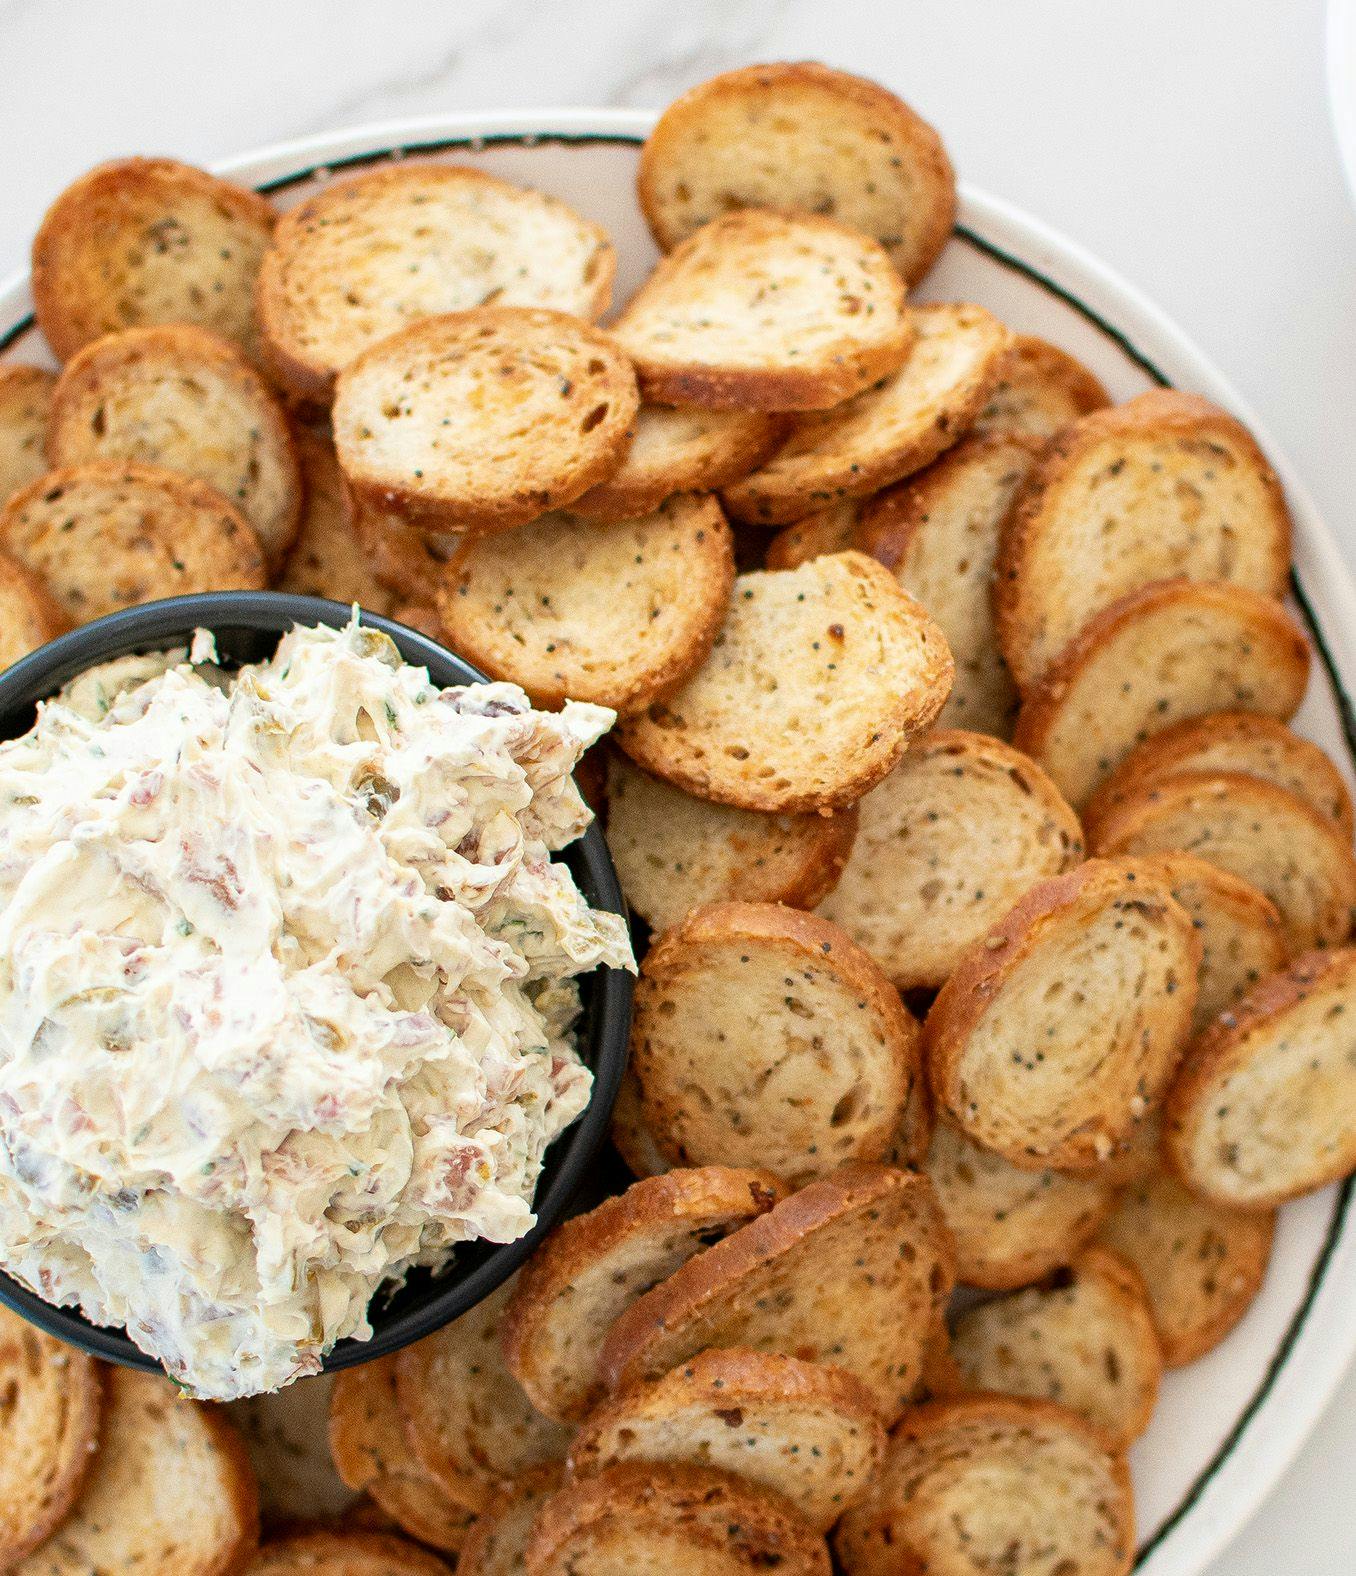 Jalapeño Bacon Cream Cheese Dip on a plate with bagel chips.